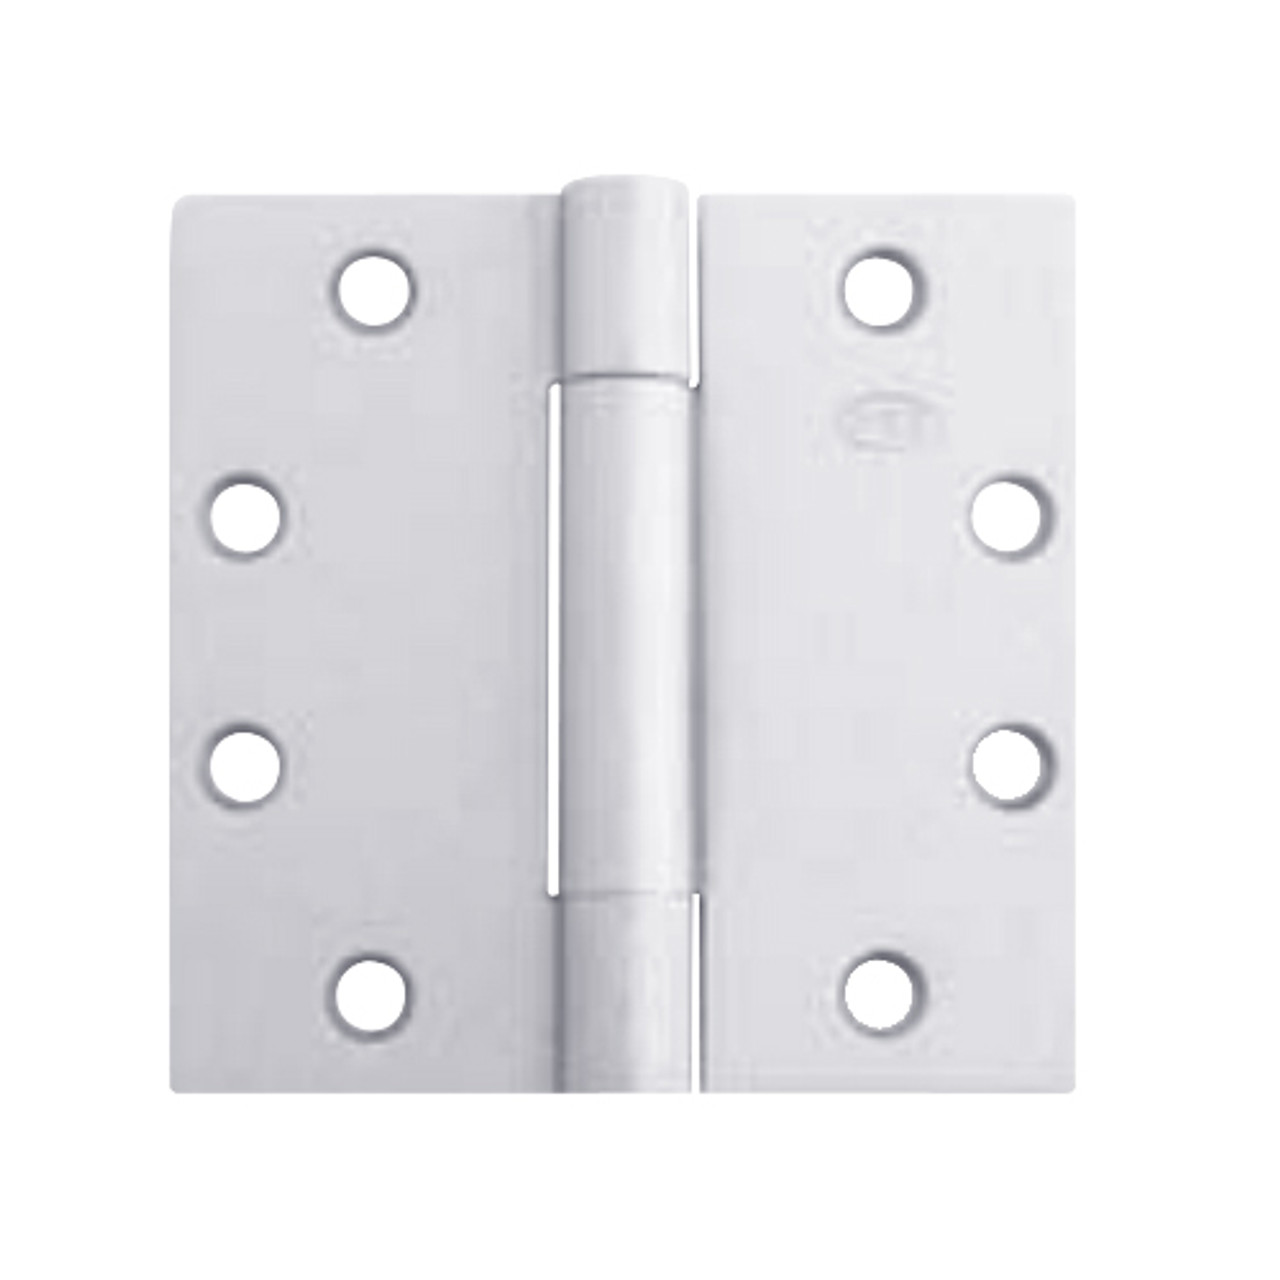 3CB1HW-4-5x4-625 IVES 3 Knuckle Concealed Bearing Full Mortise Hinge in Bright Chrome